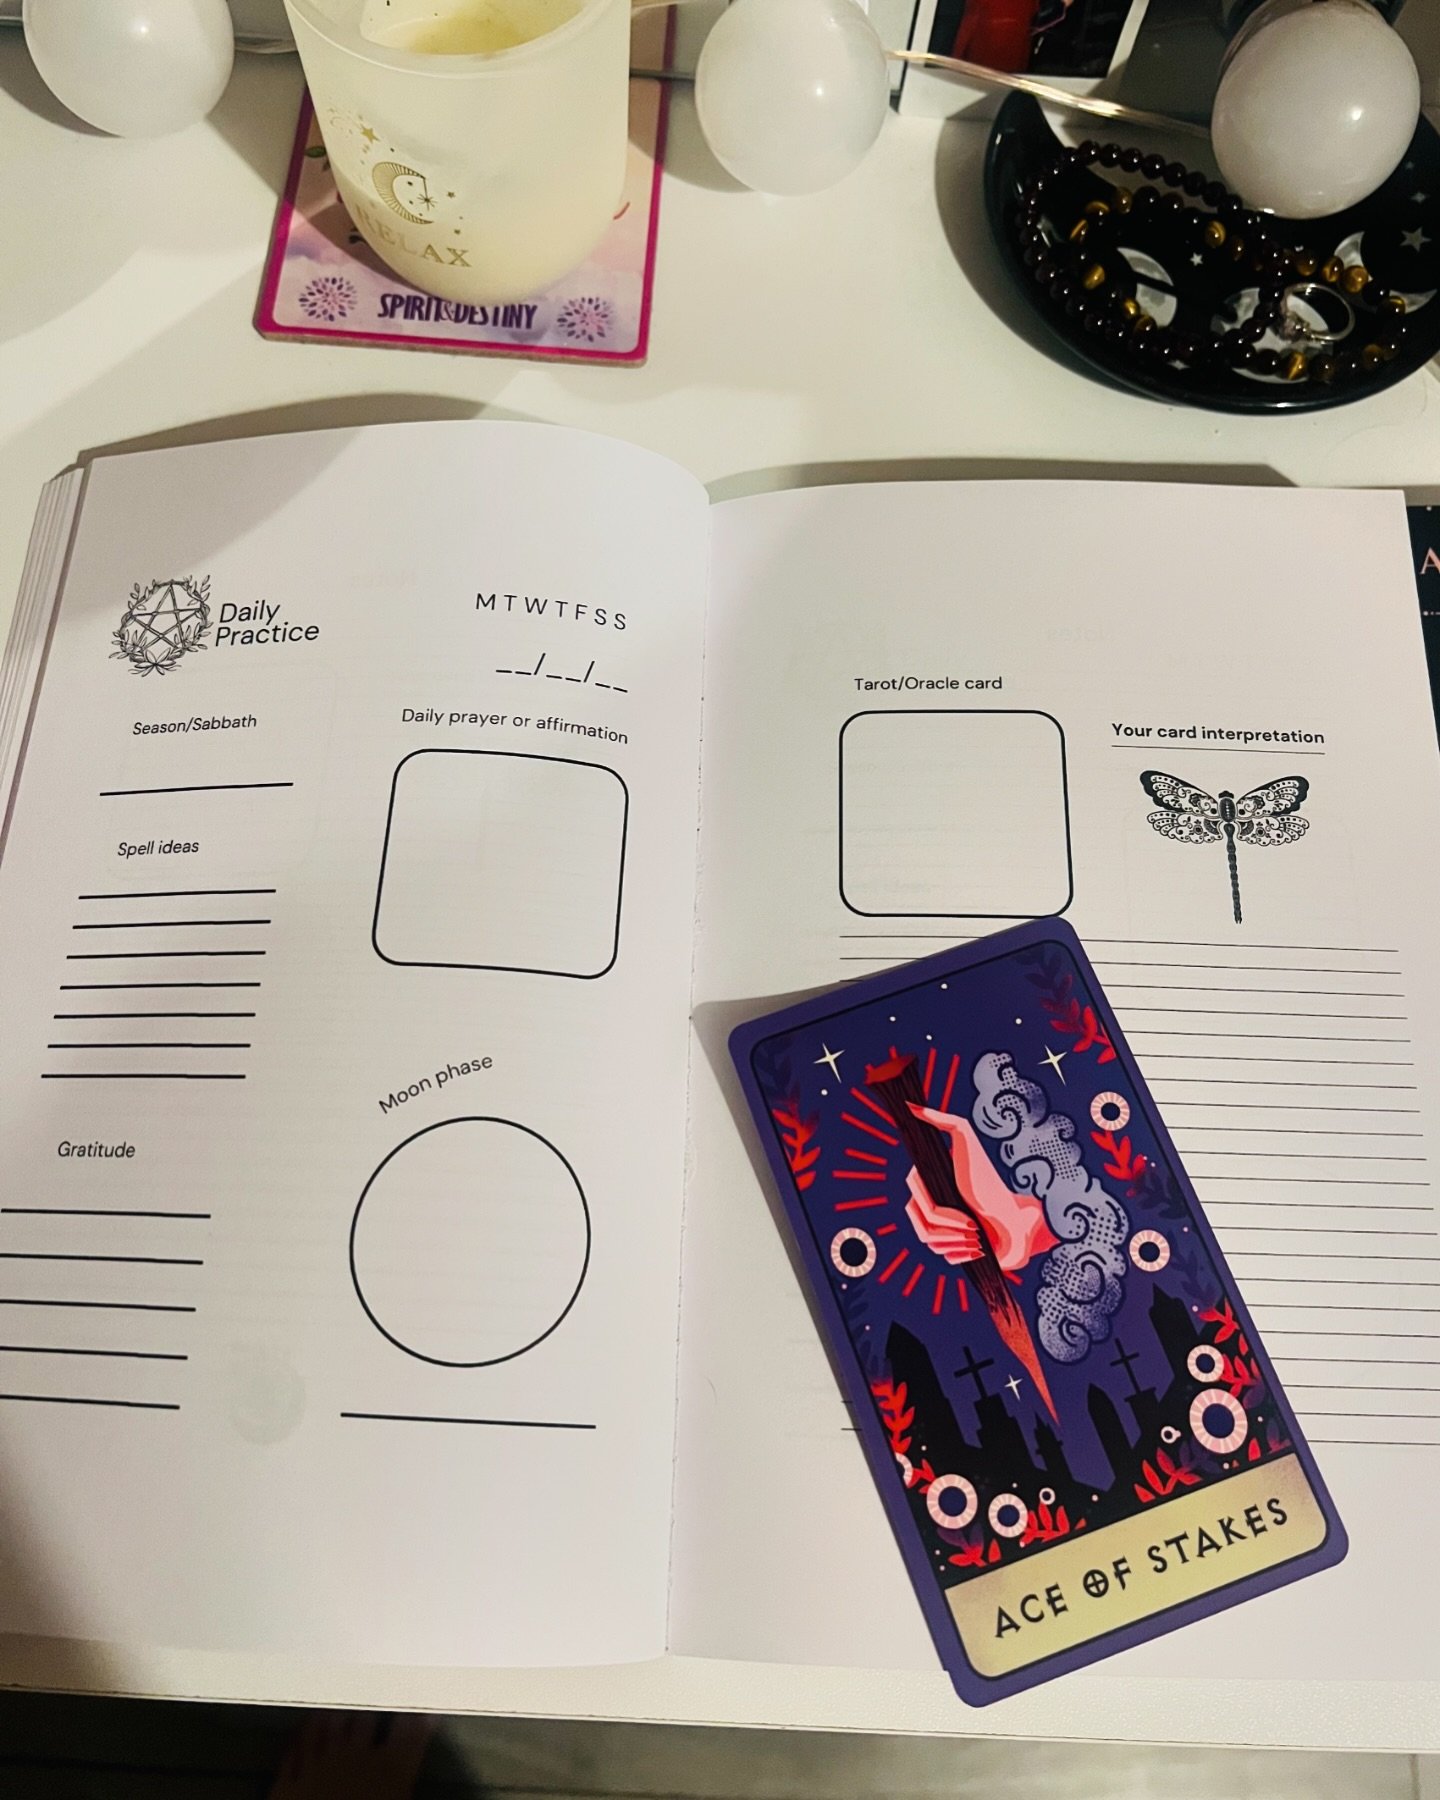 🌙Starting my morning with a card pull and journaling! Happy Monday!🌙 #pagansofinstagram #witchesofinstagram #tarotcards #tarotreading #tarotreadersofinstagram #wiccans